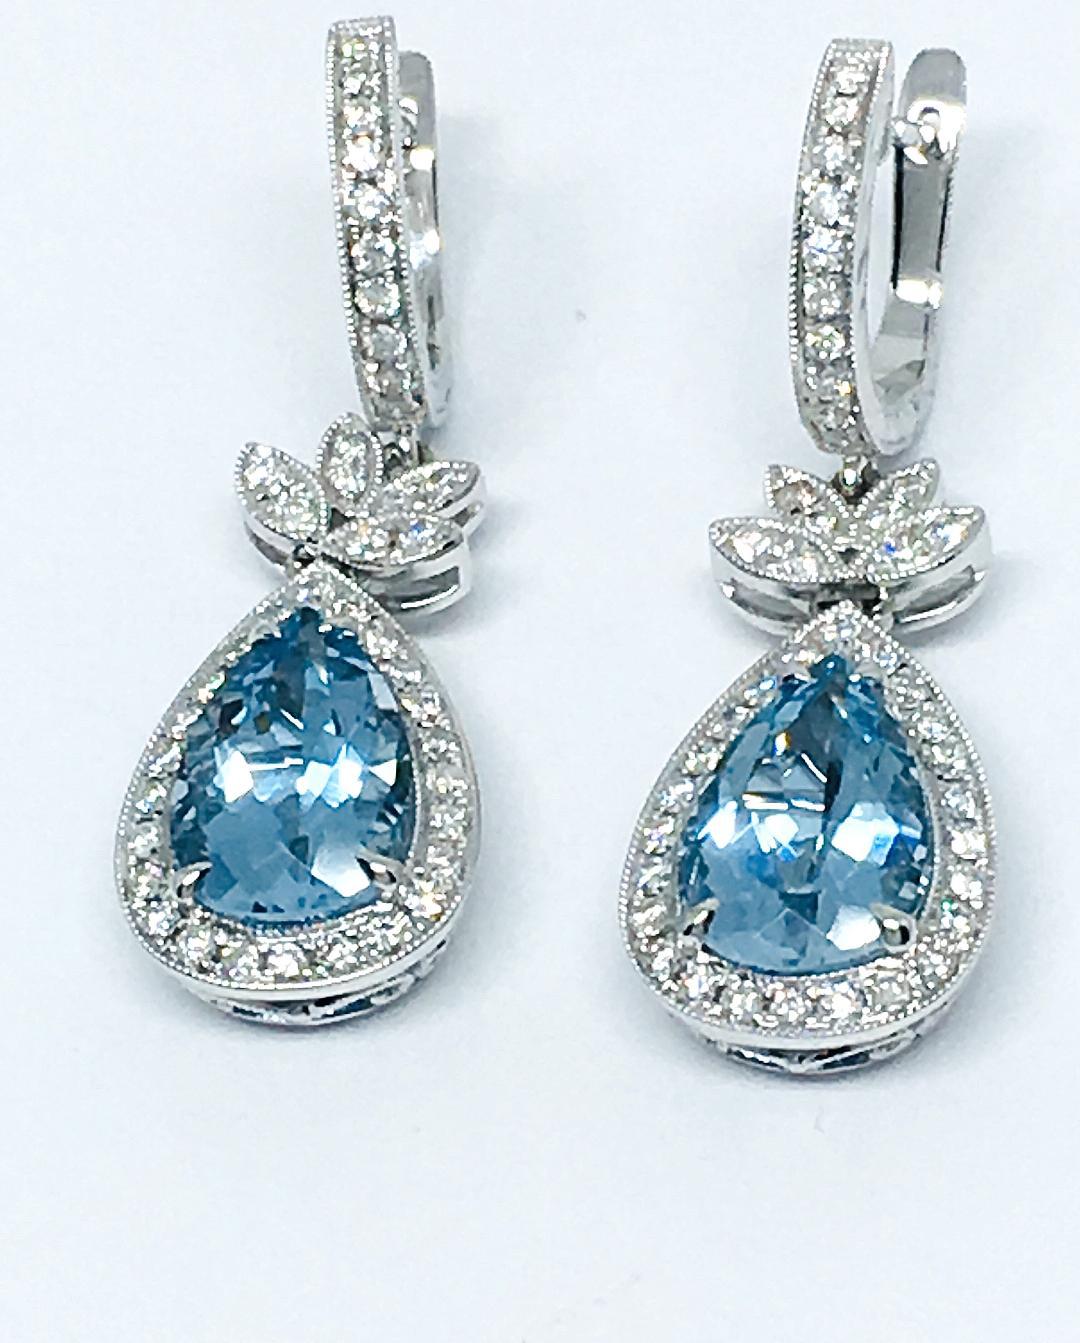 18k White Gold 
2 Aquamarine 4.96 Total Carat Weight 
84 Diamond 0.85 Total Carat Weight 
Color F
Clarity VS2
1.5